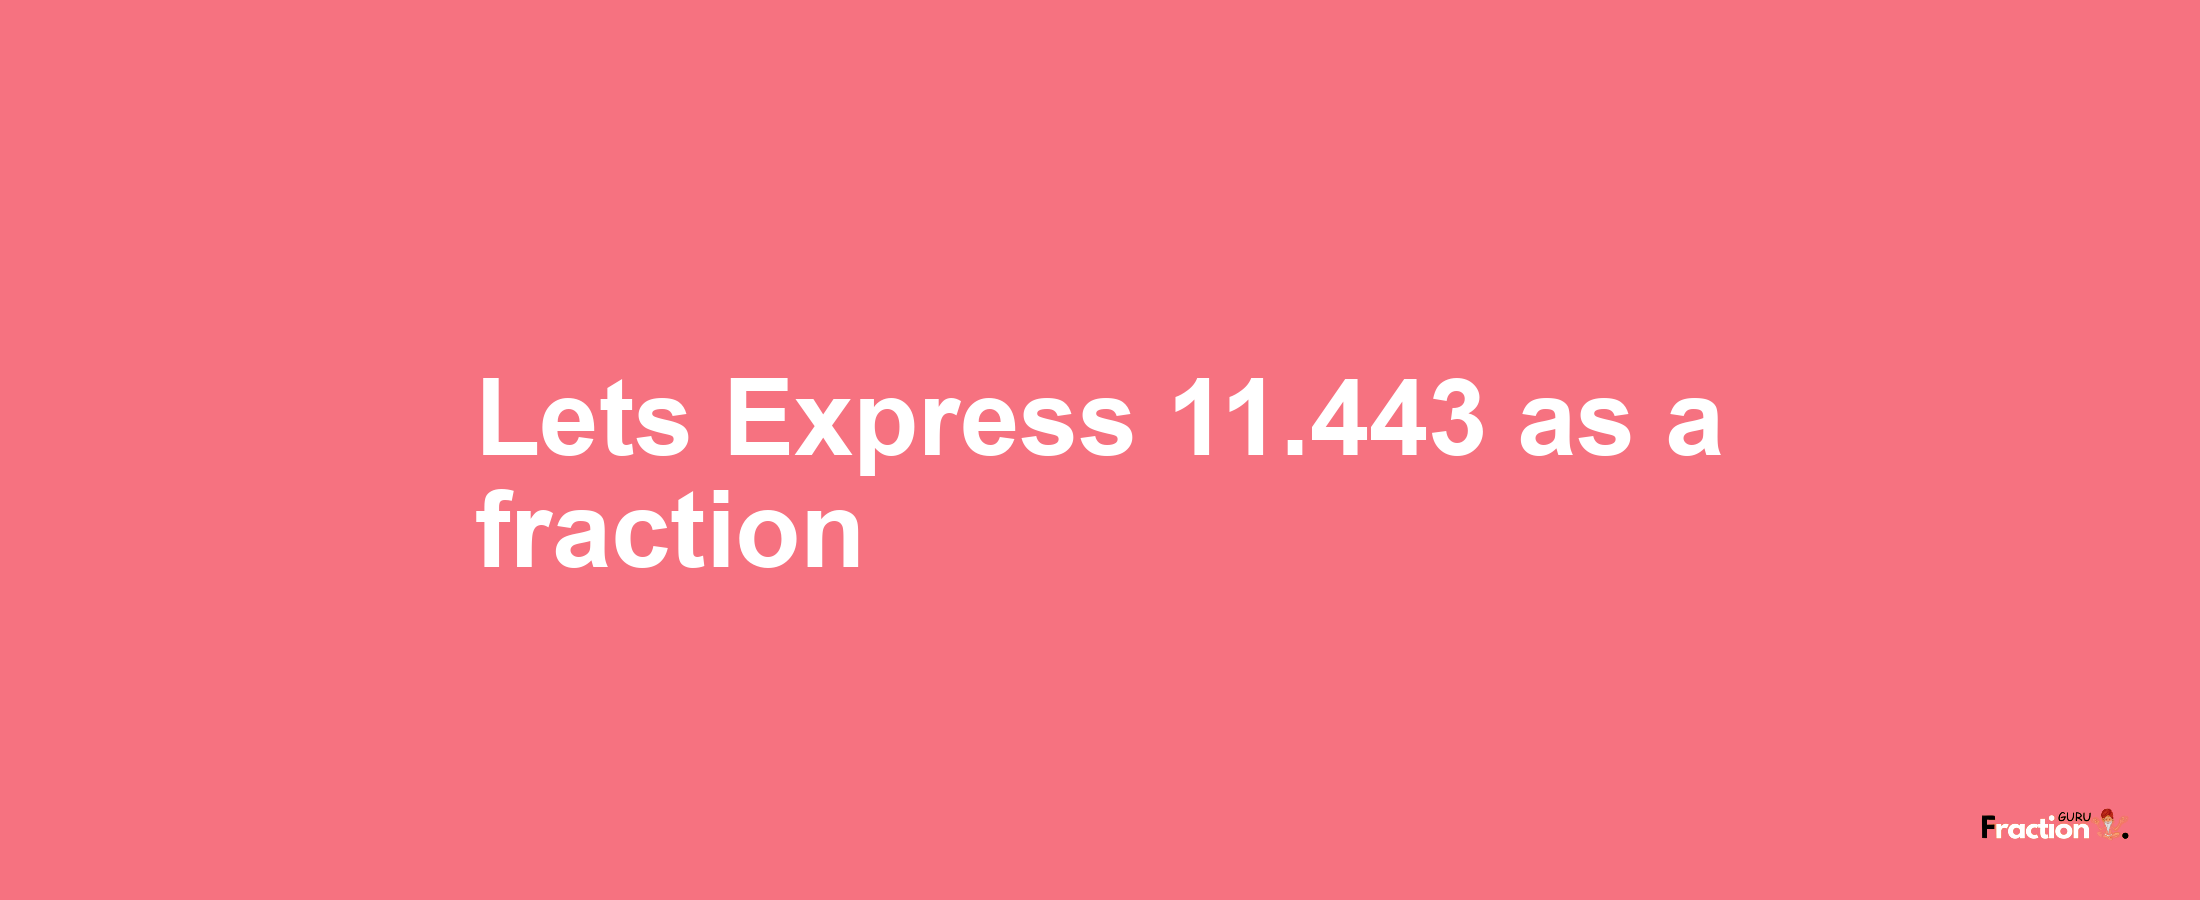 Lets Express 11.443 as afraction